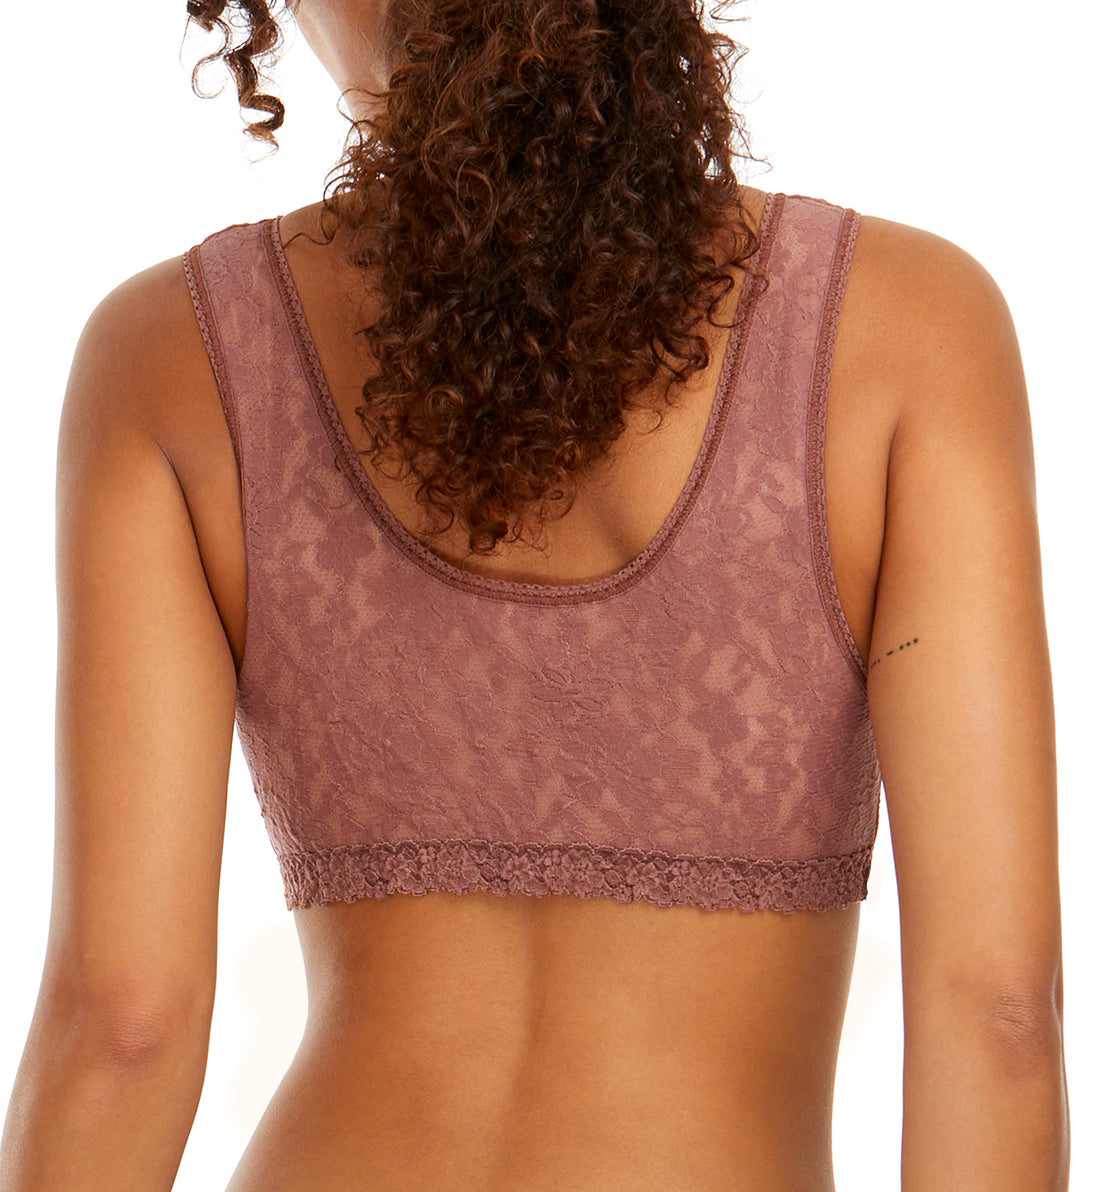 Hanky Panky Daily Lace Scoop Neck Lined Bralette (777991)- All Spice